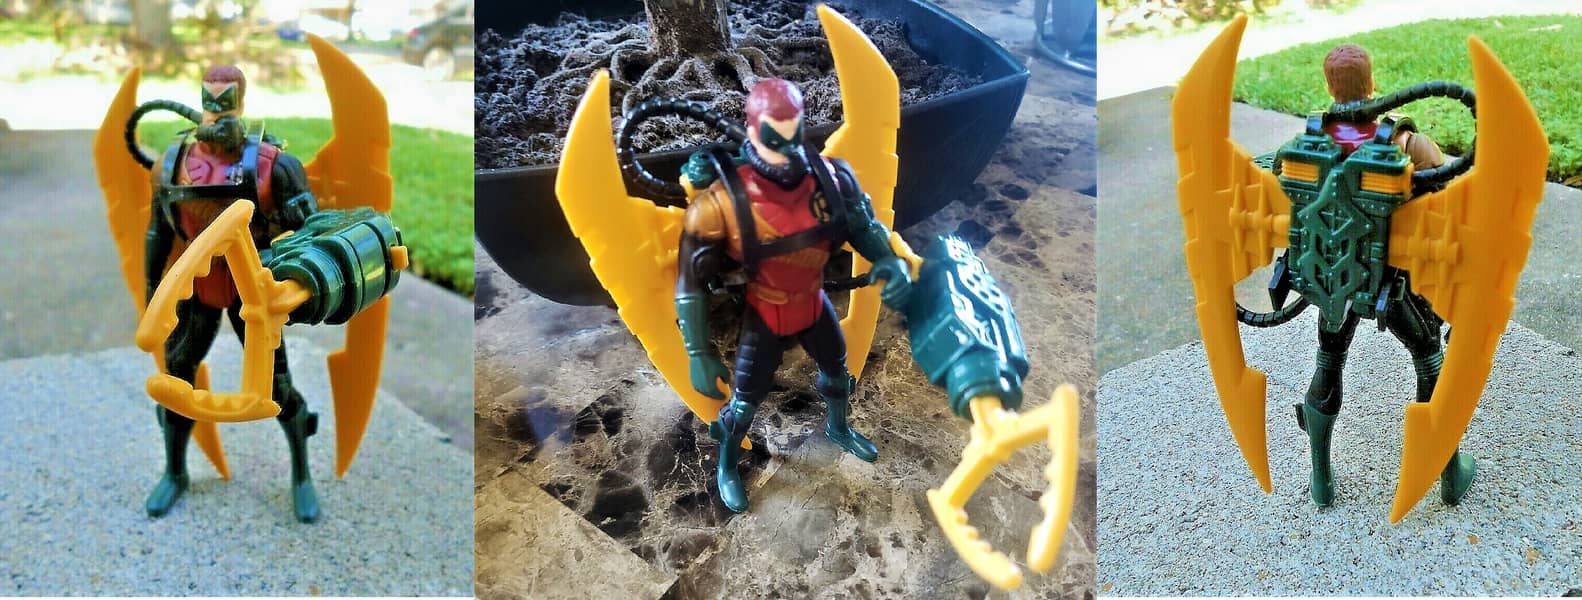 1995 BATMAN FOREVER - Hydro Claw Robin Vintage Action Figure by KENNER 0